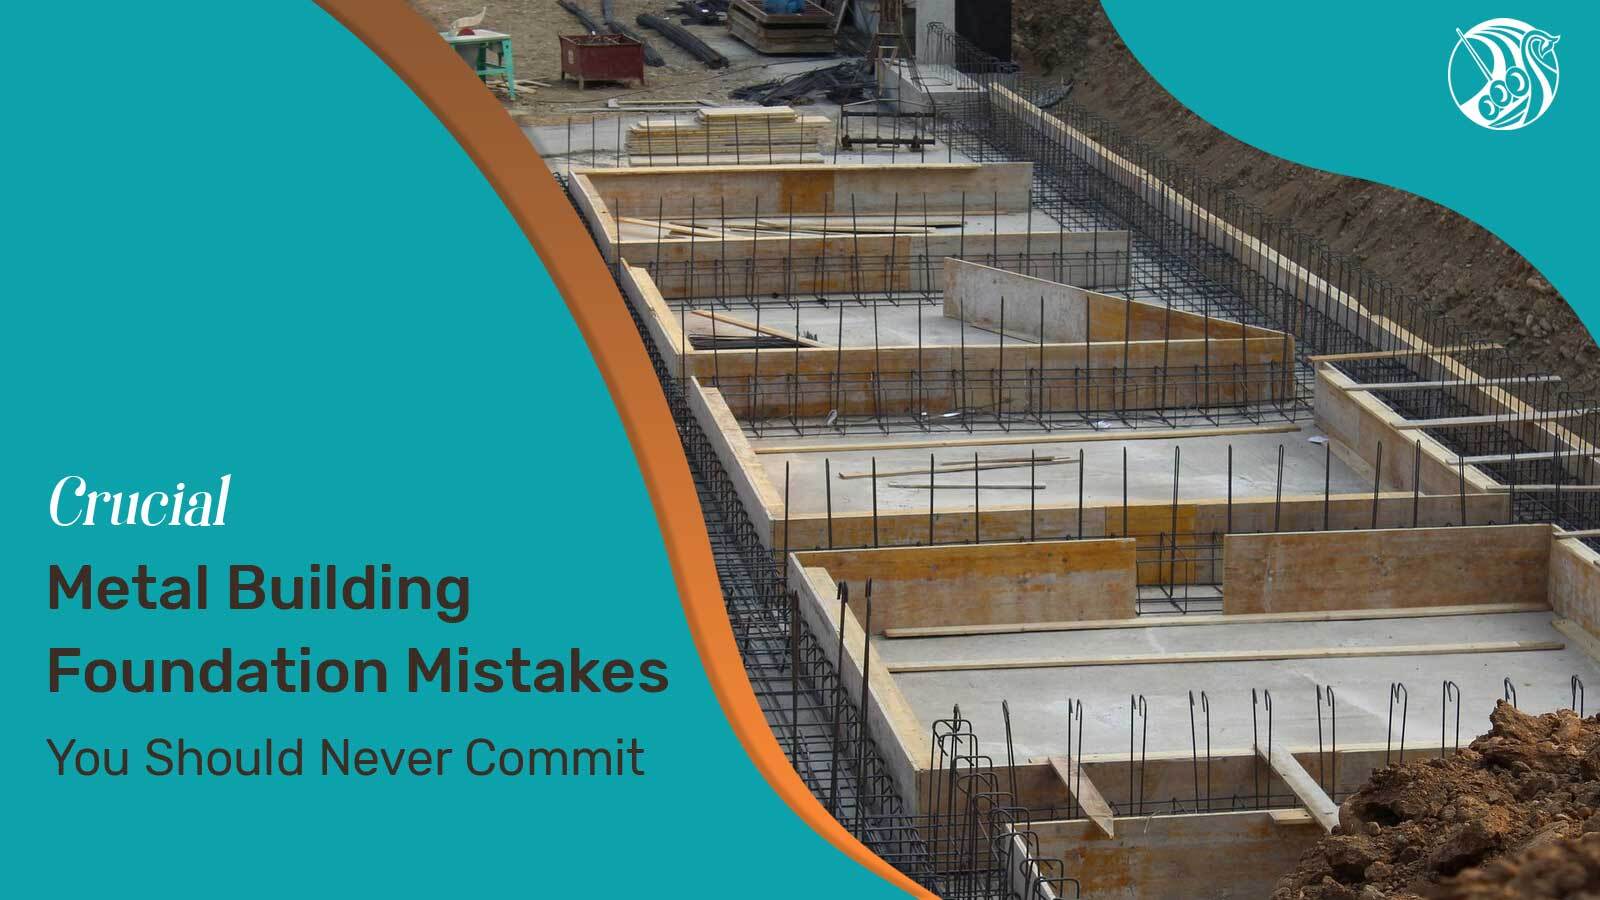 Crucial Metal Building Foundation Mistakes You Should Never Commit